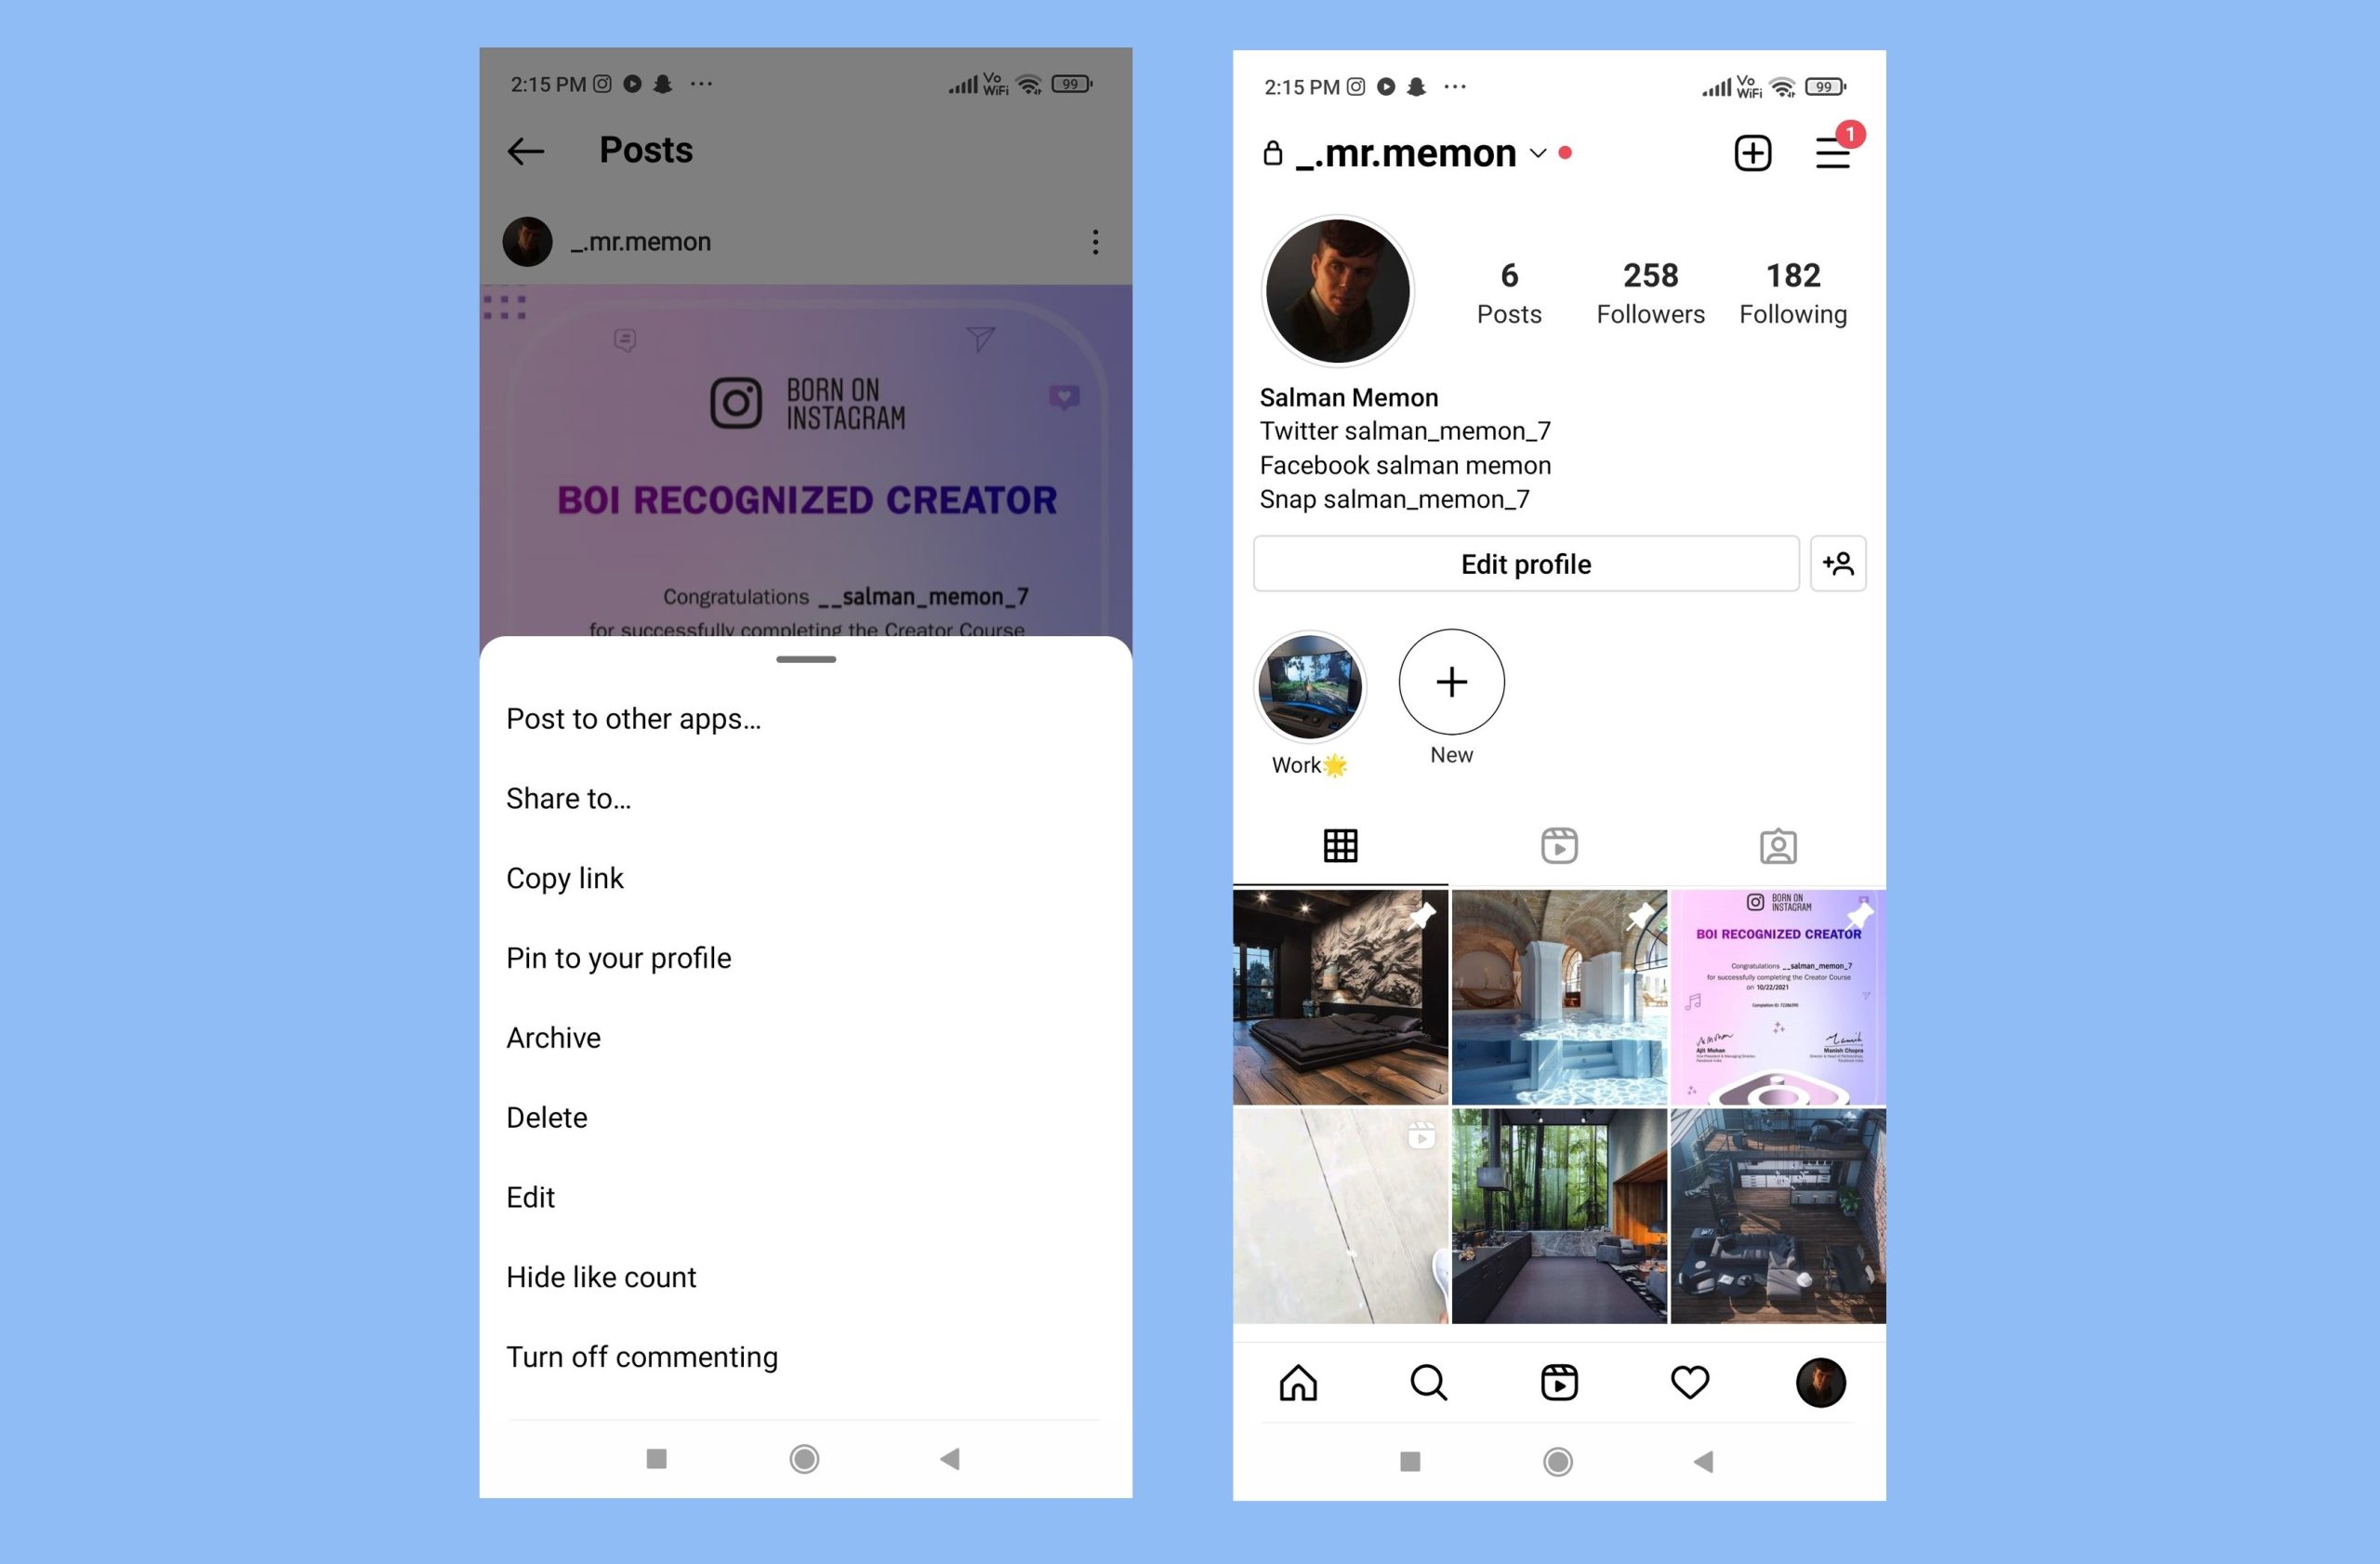 How to Pin Photos and Videos to Your Instagram Profile - Fremo